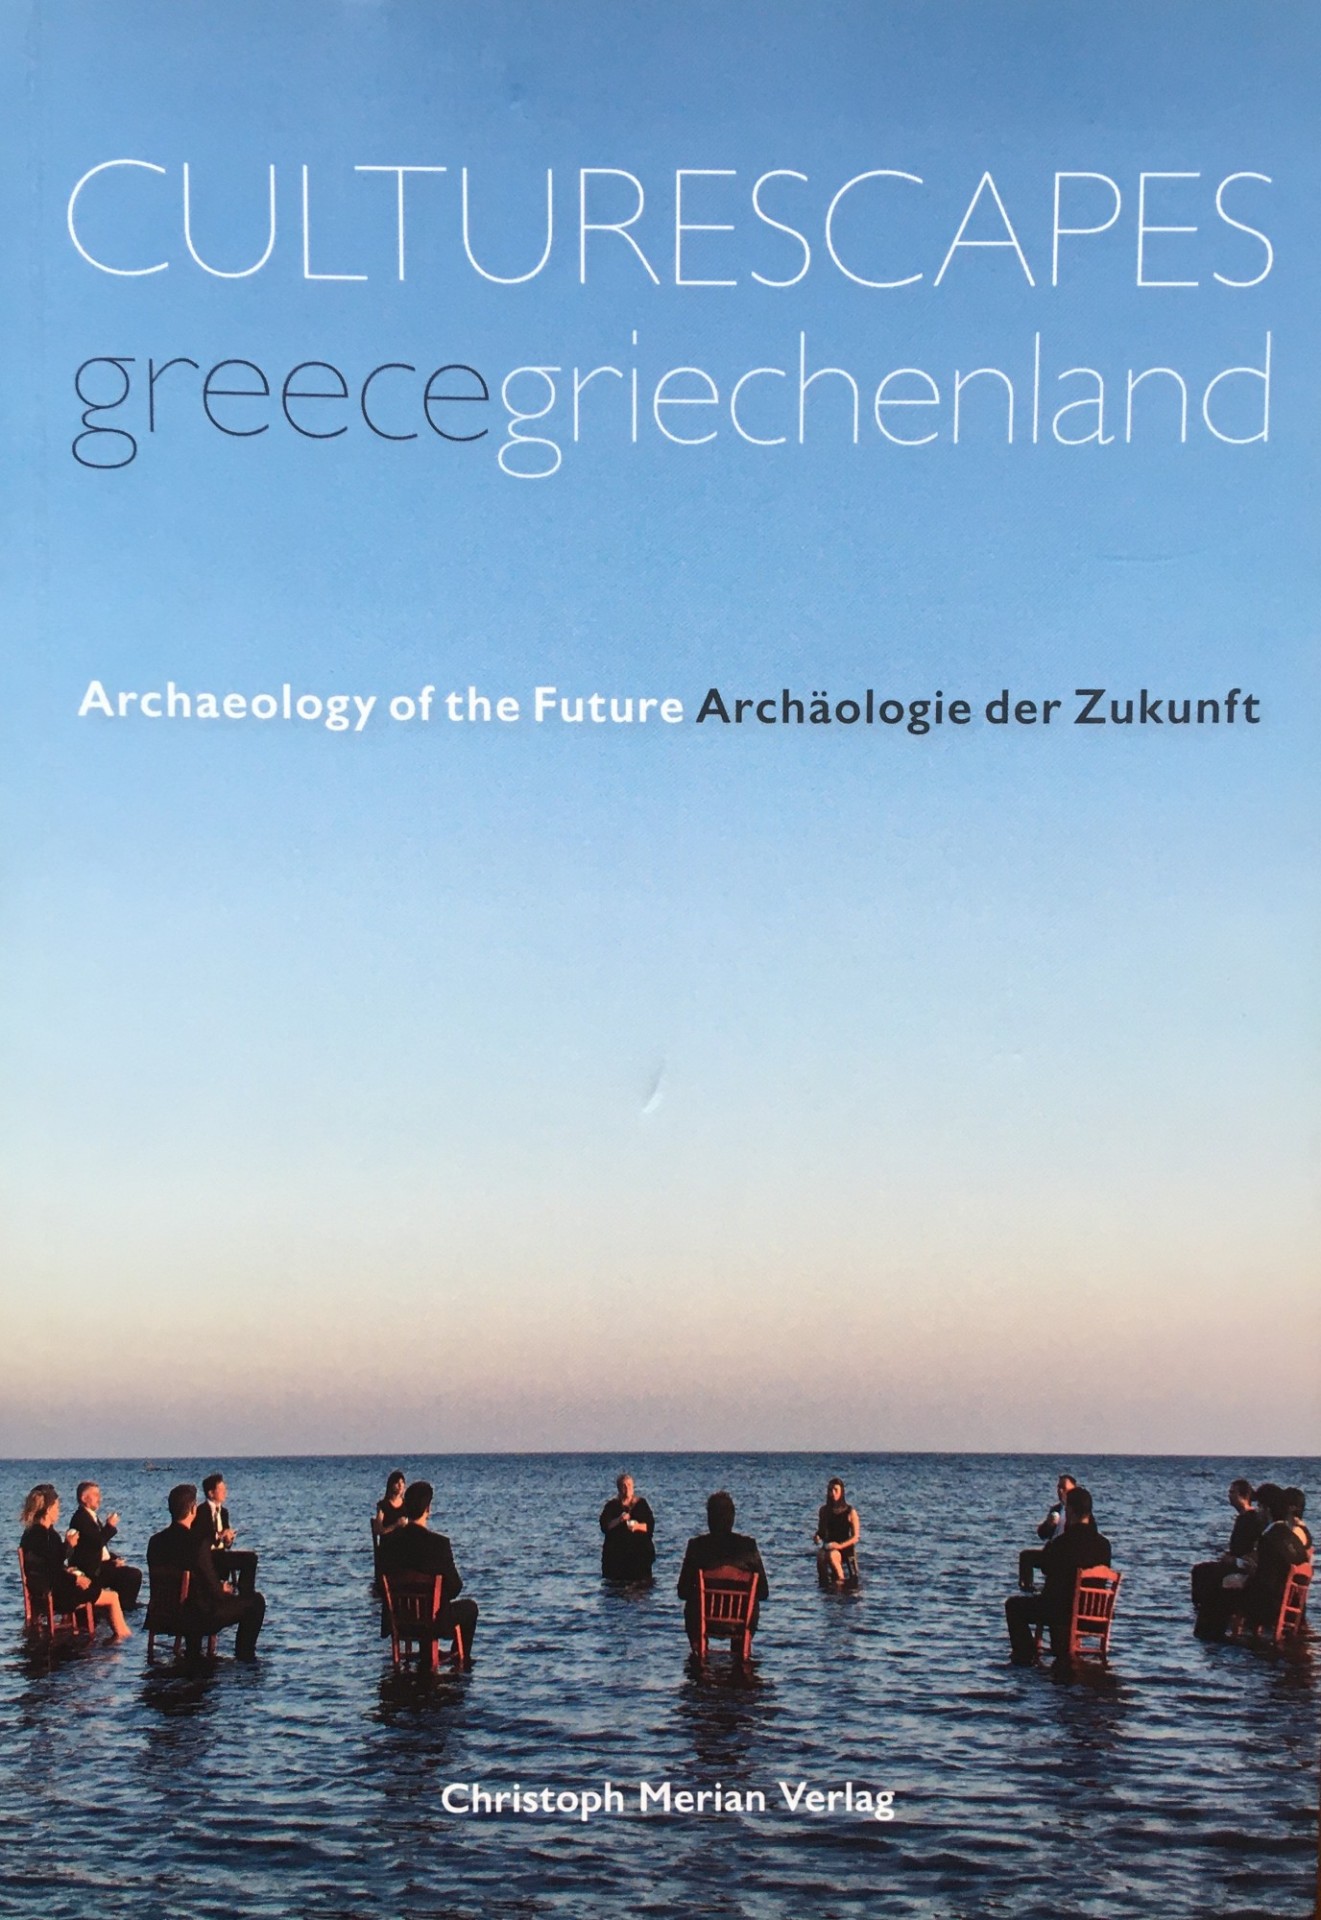 book cover image: "Culturescapes Greece - Archaeology of The Future"